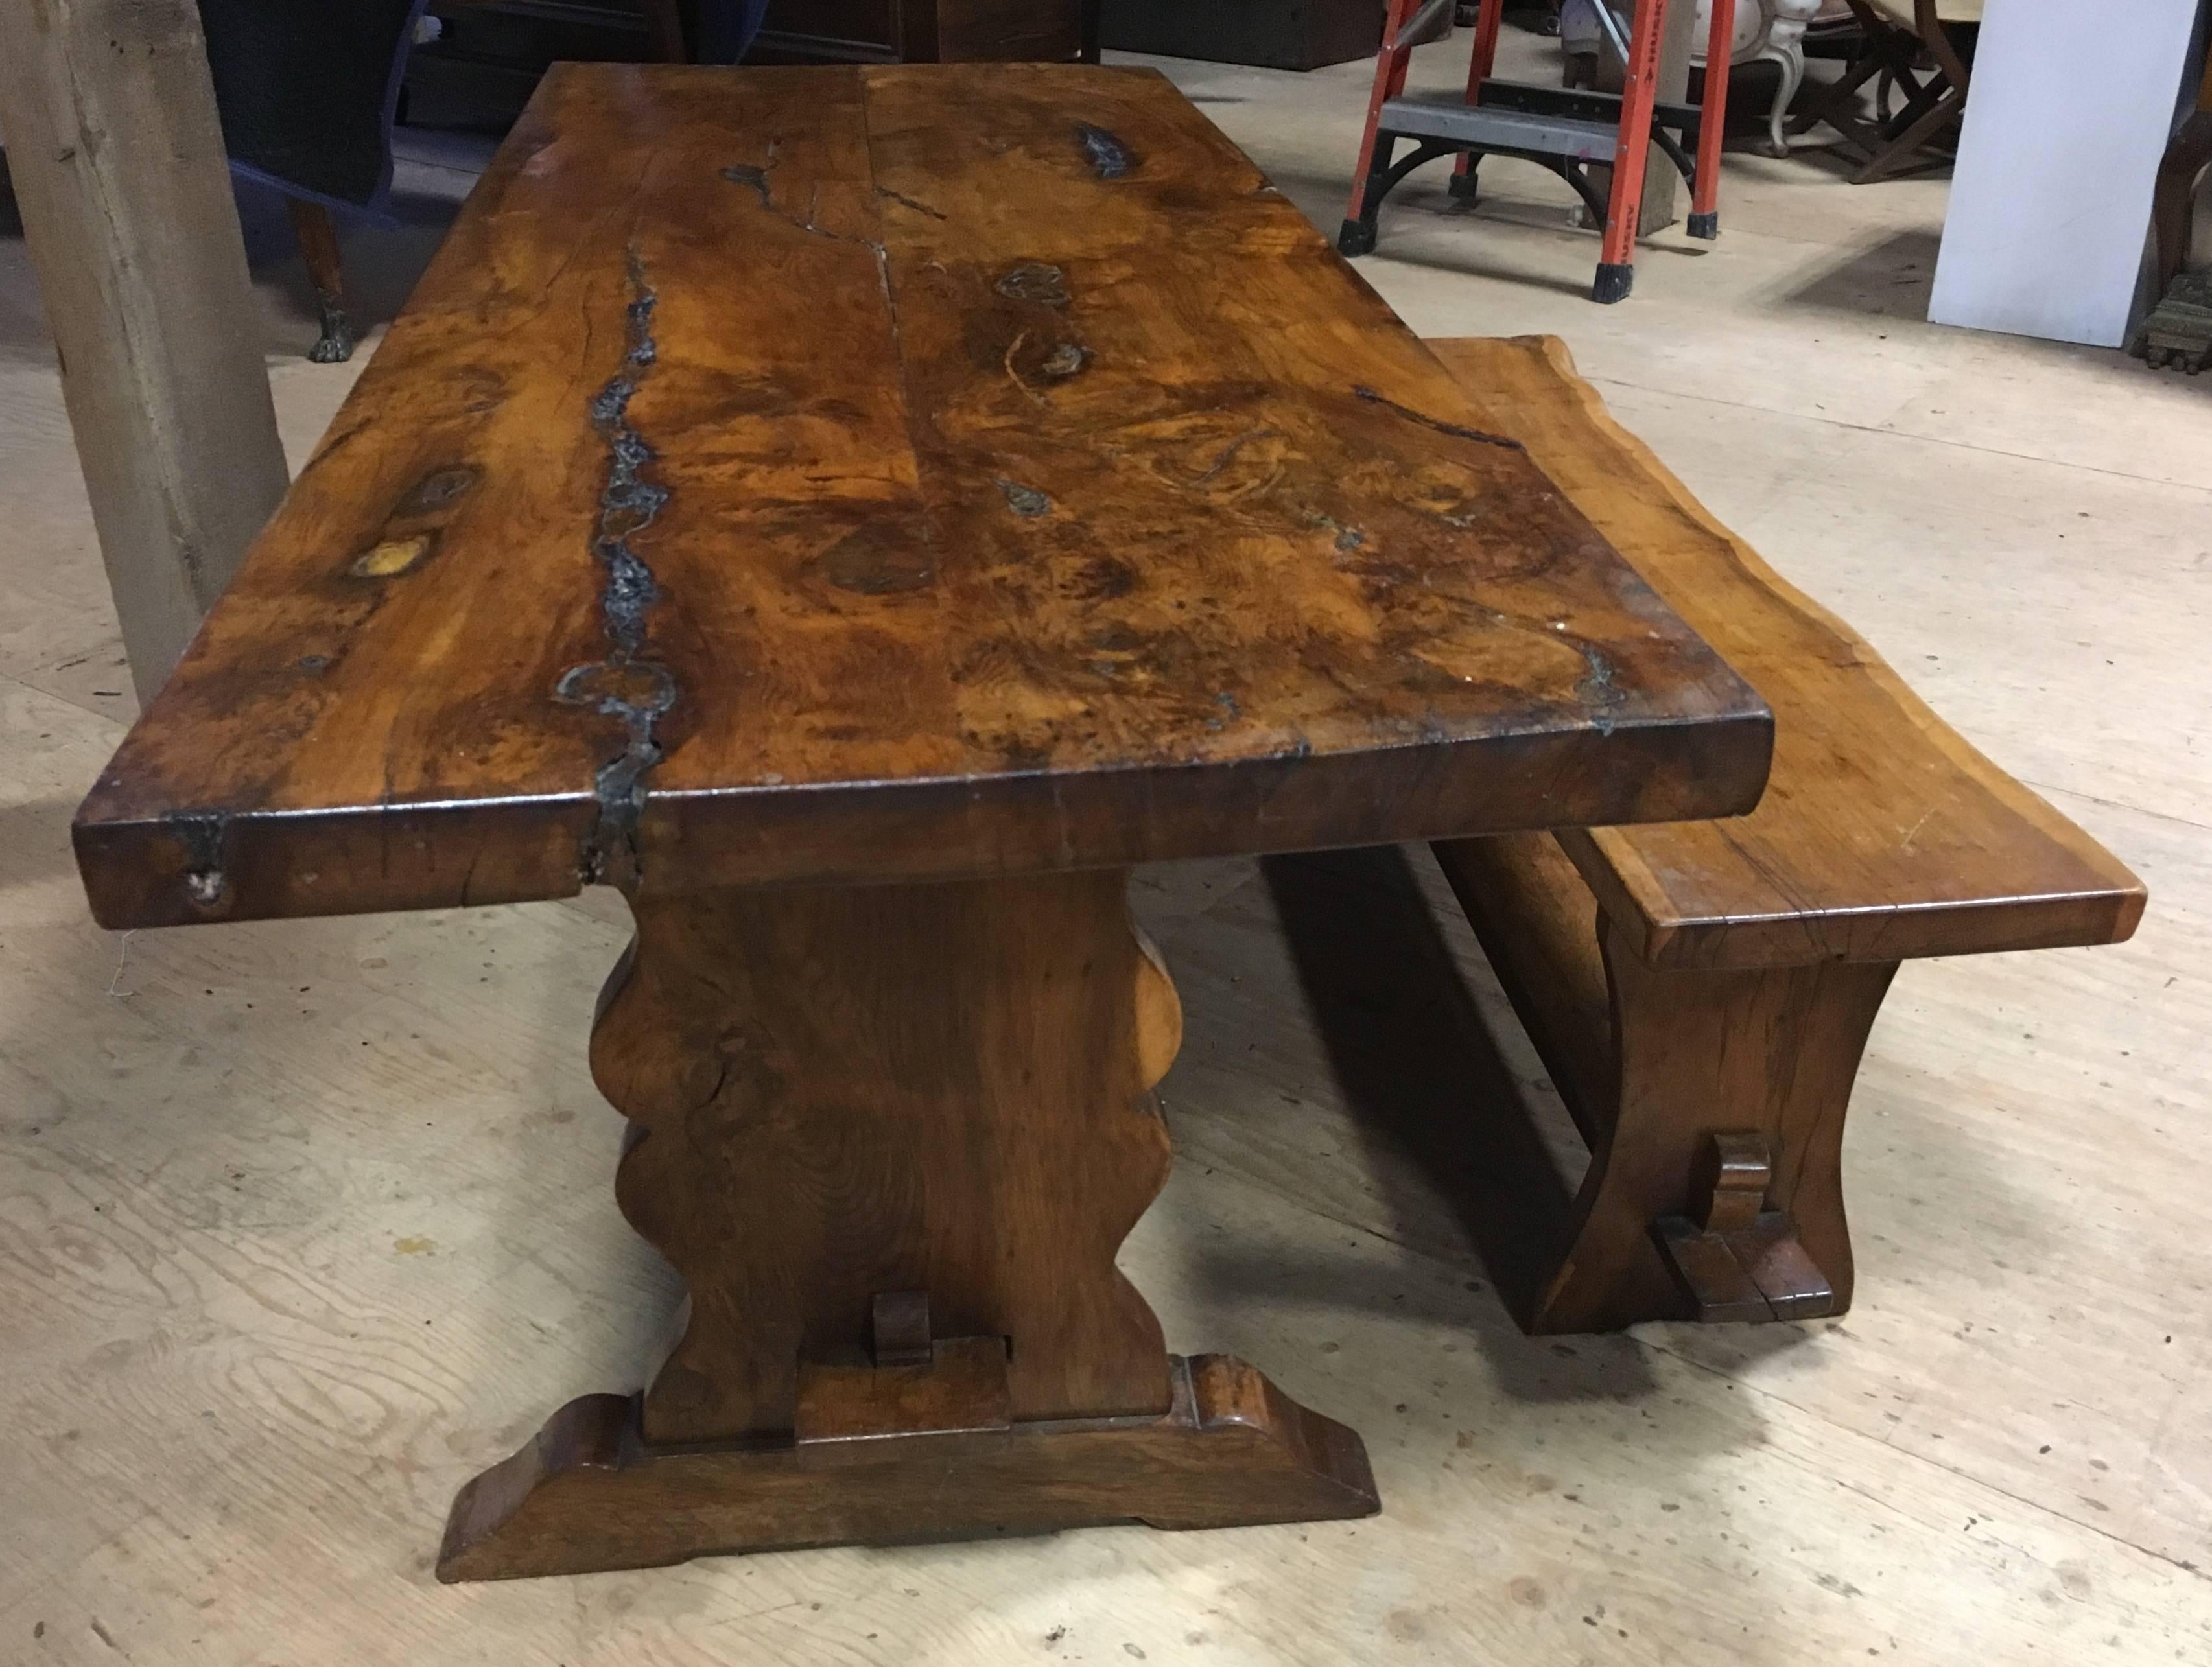 A rustic yew wood slab-top trestle table, 19th century English, with natural imperfections, available with a matching bench (sold separately). The top is two boards 2